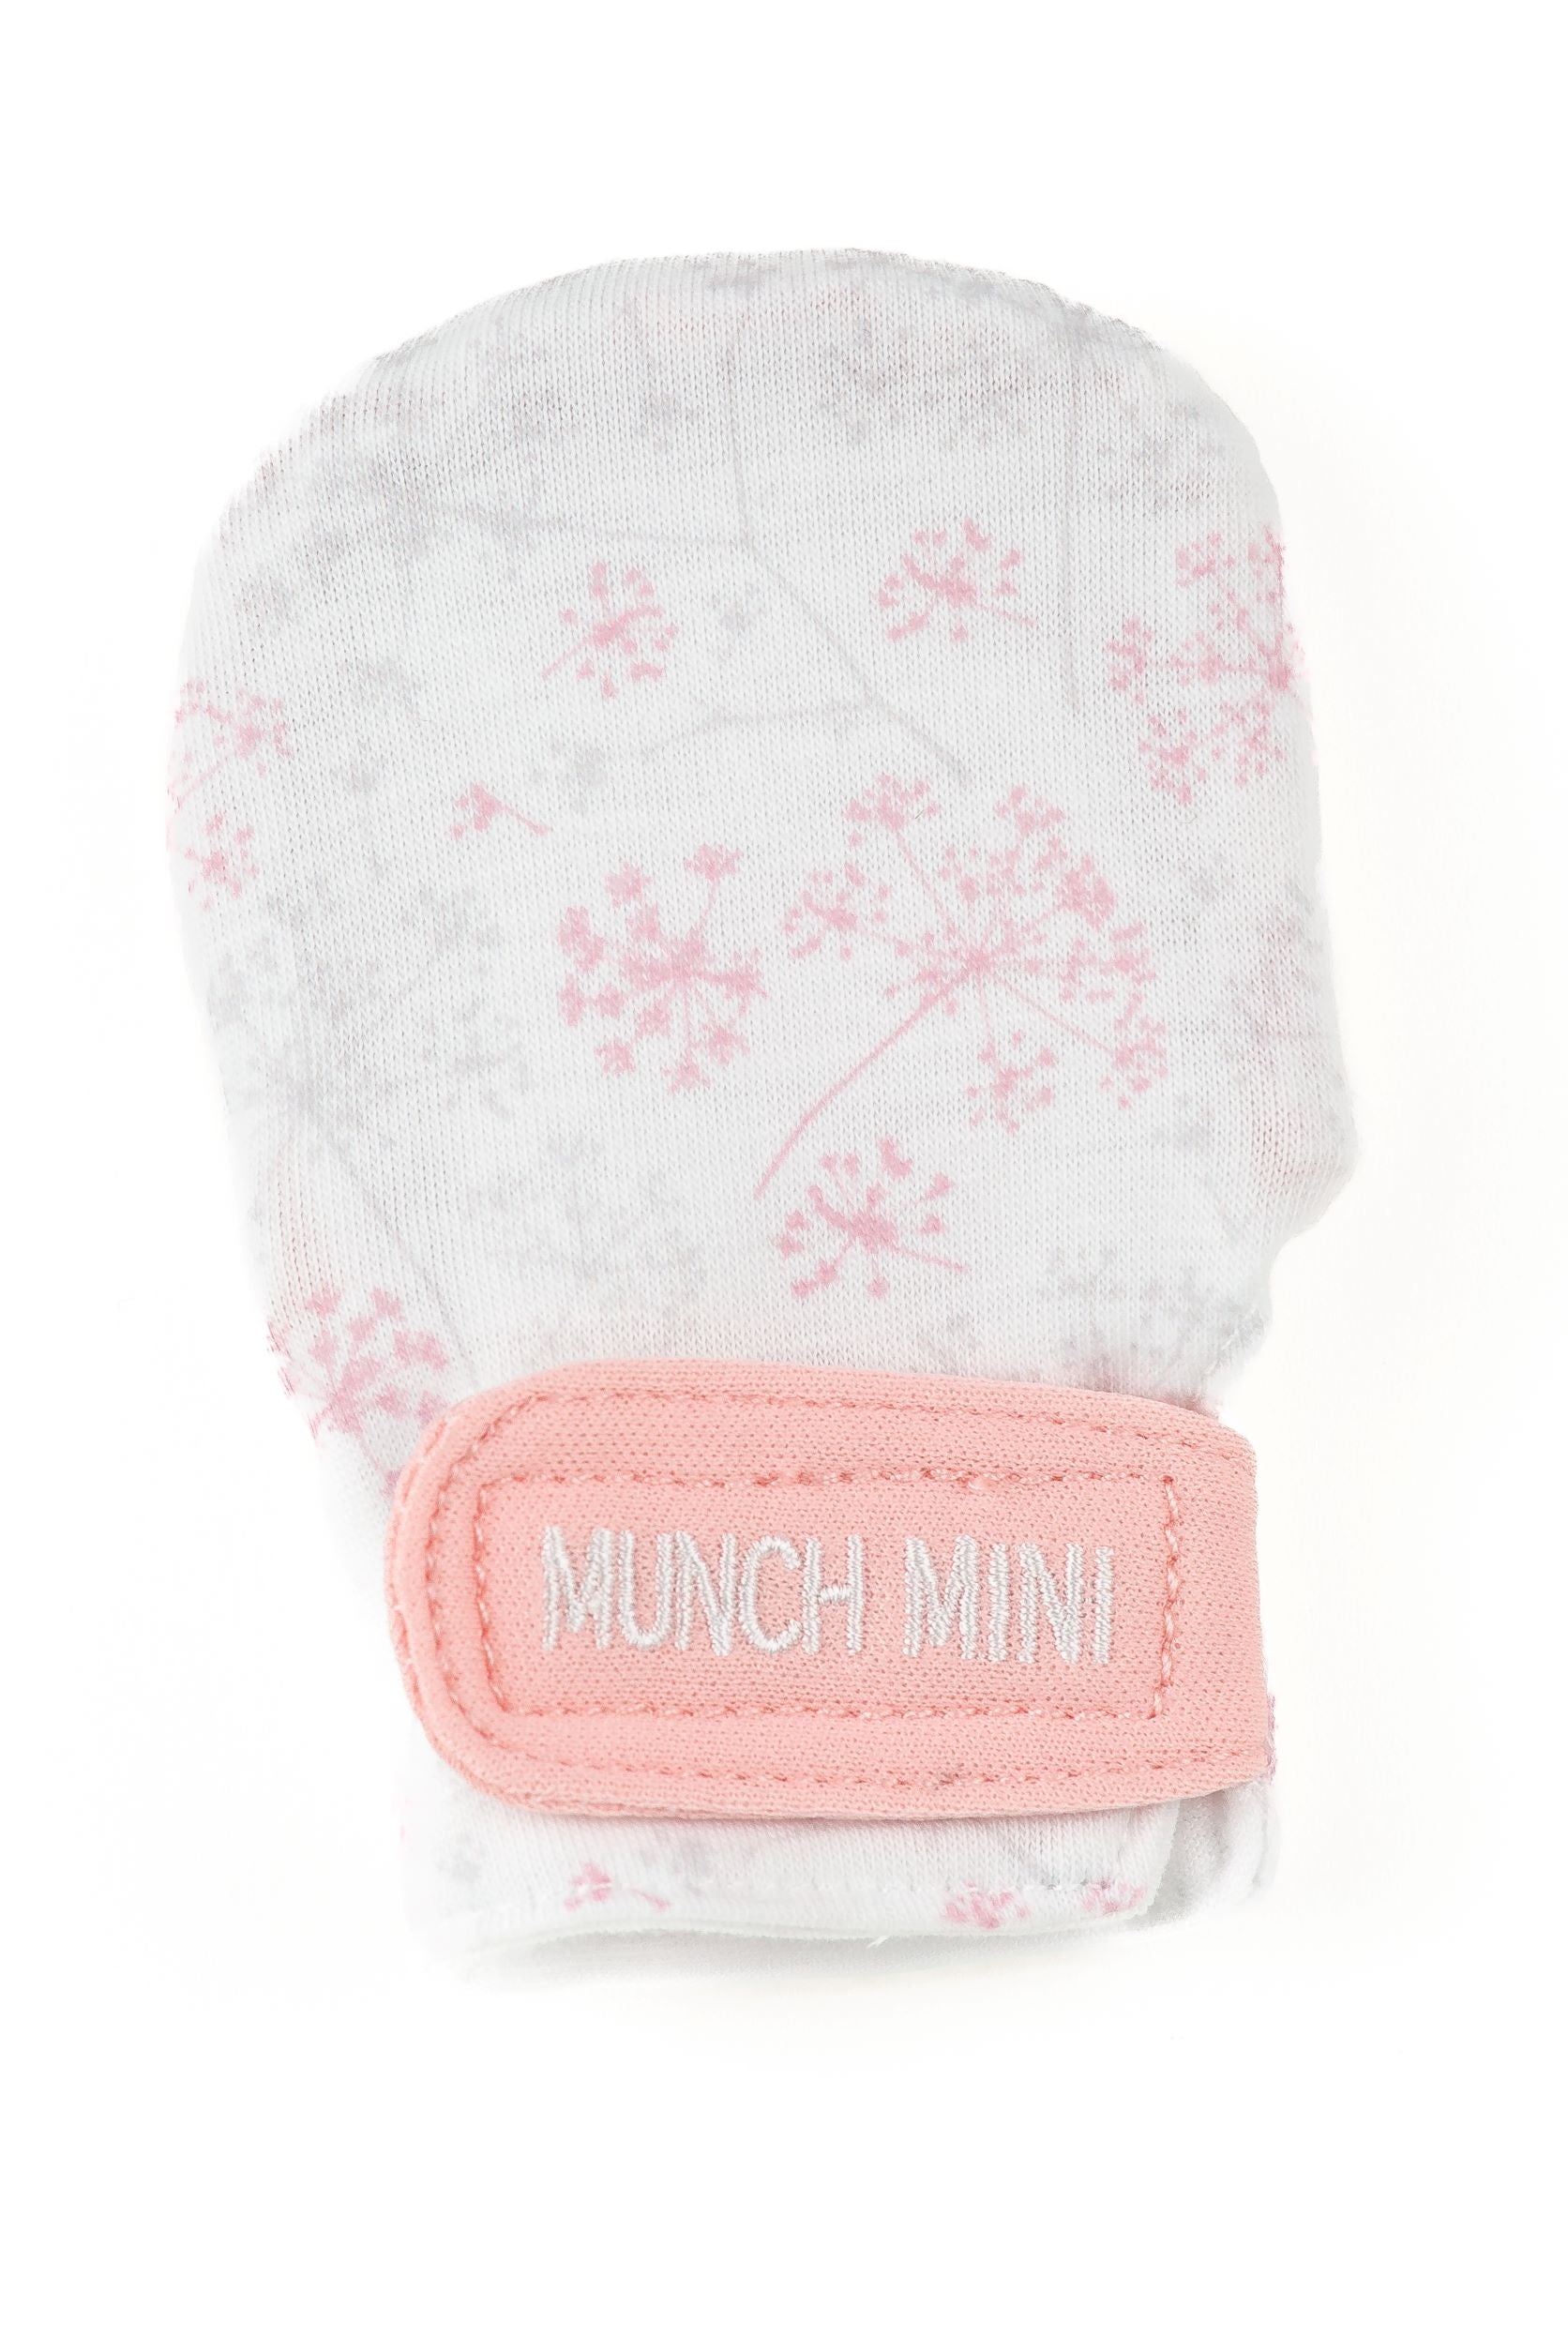 Munch Minis - Teething & Anti-scratch mitts - Floral Wishes Pacifiers & Teethers Malarkey Kids 